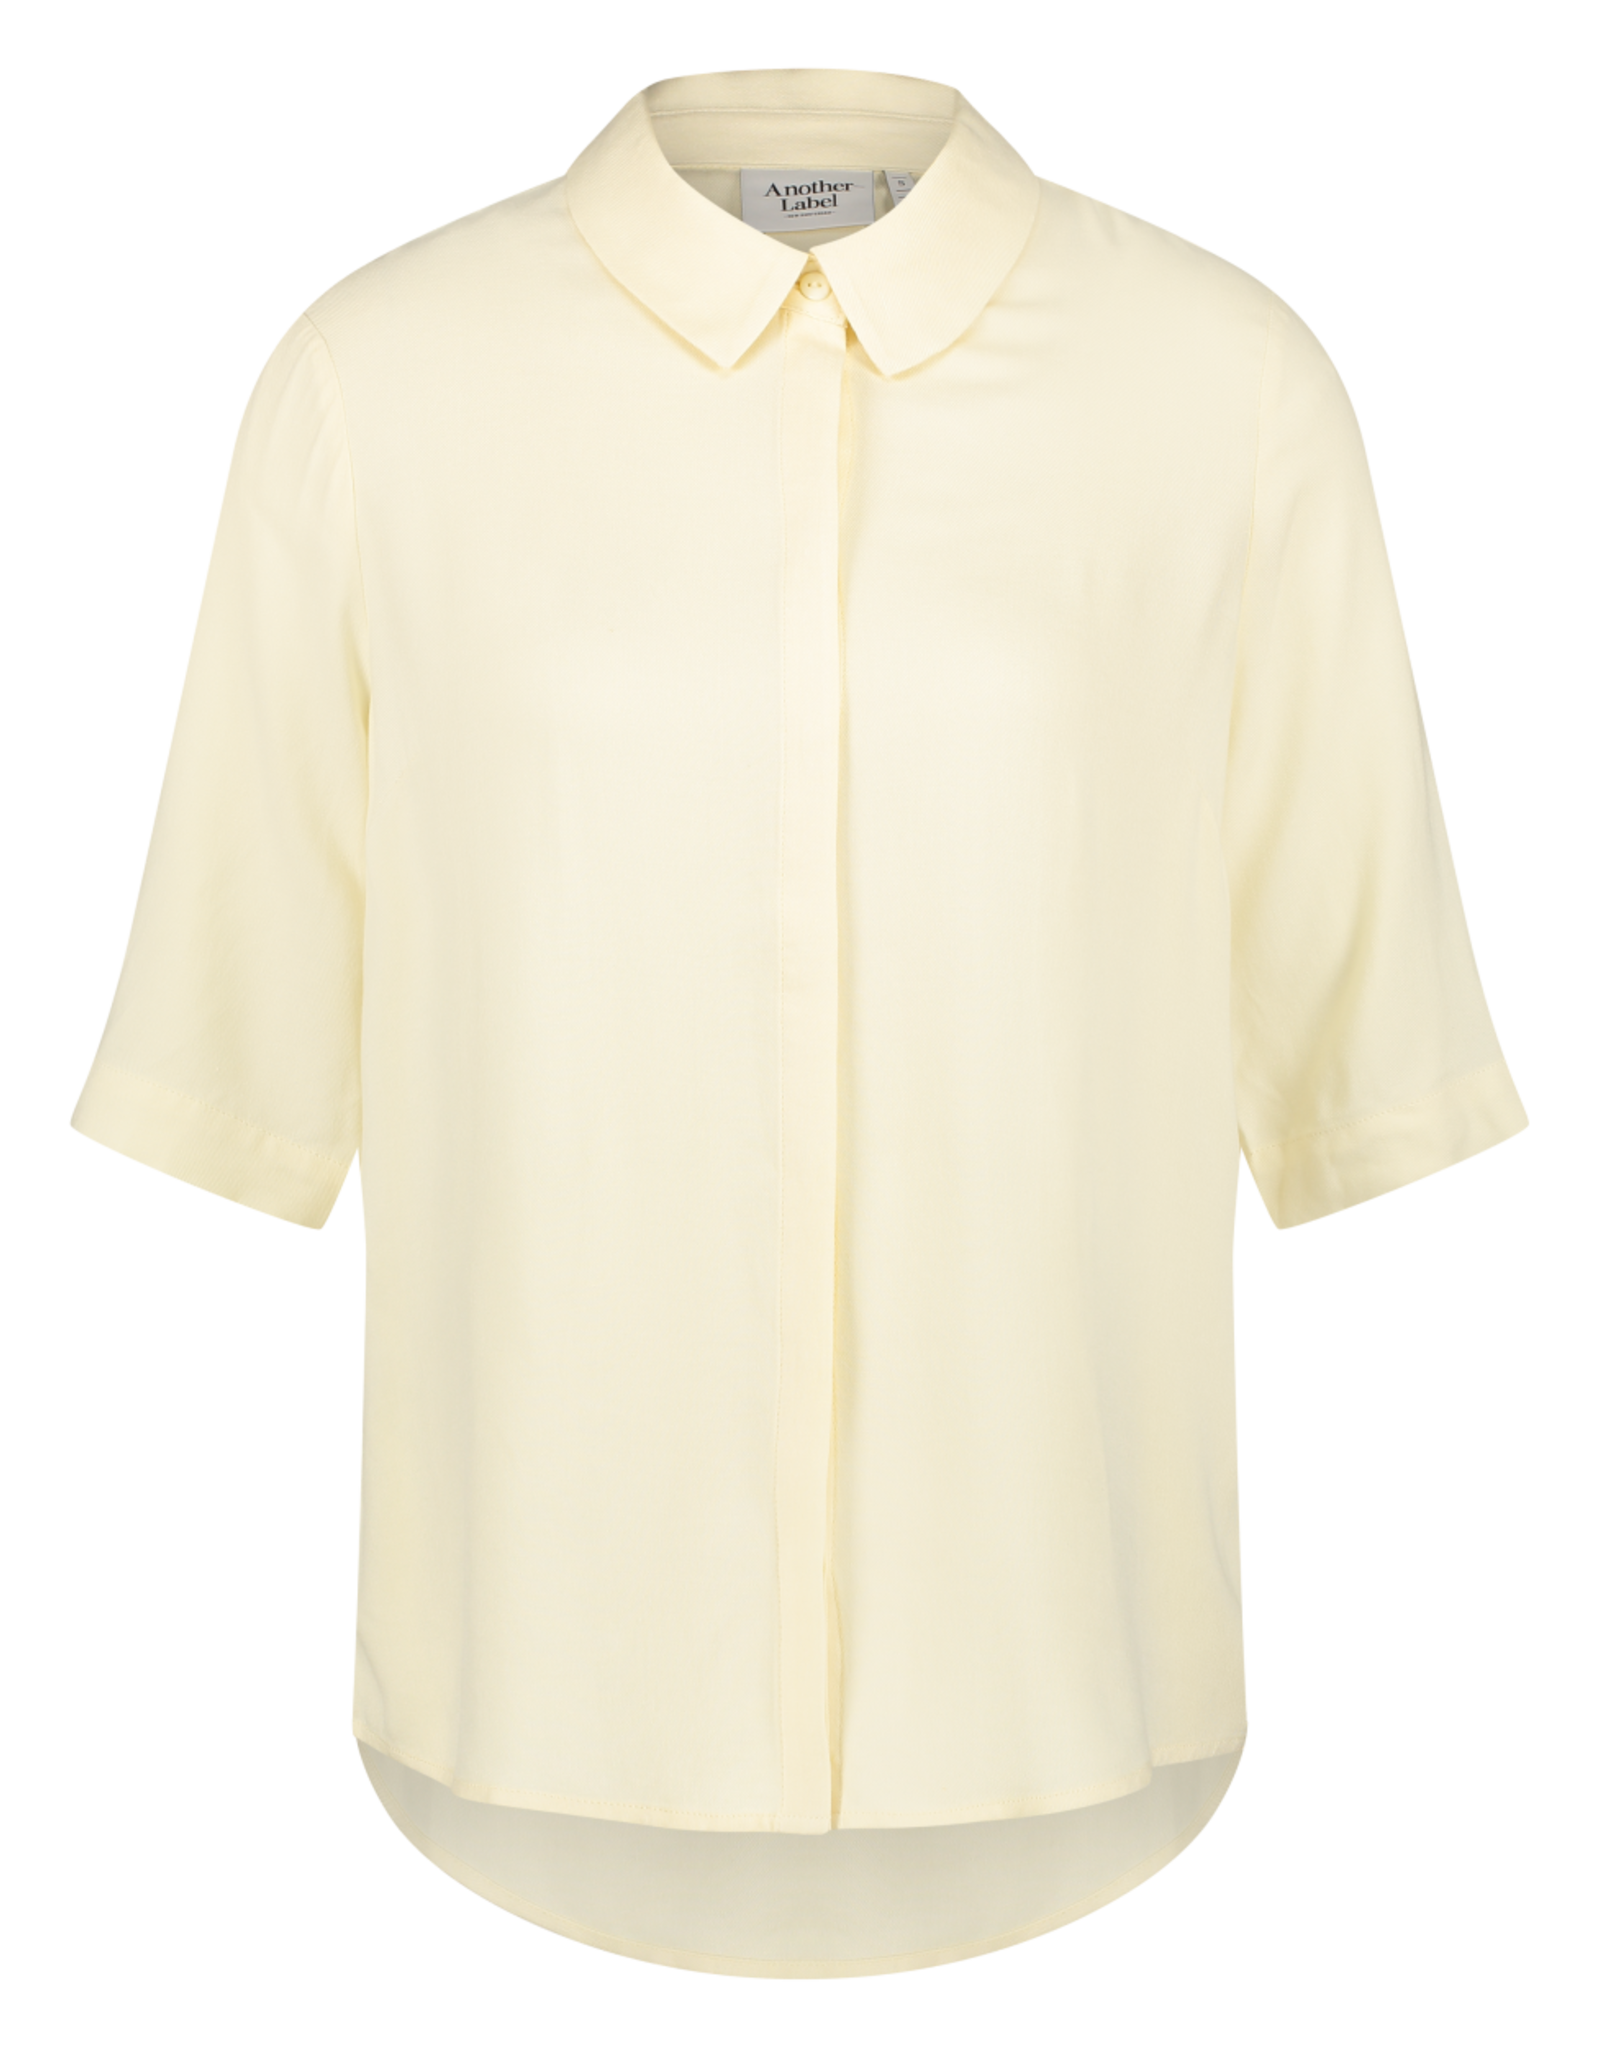 Another Label Blouse 'Bache' Soft Yellow - Another-Label